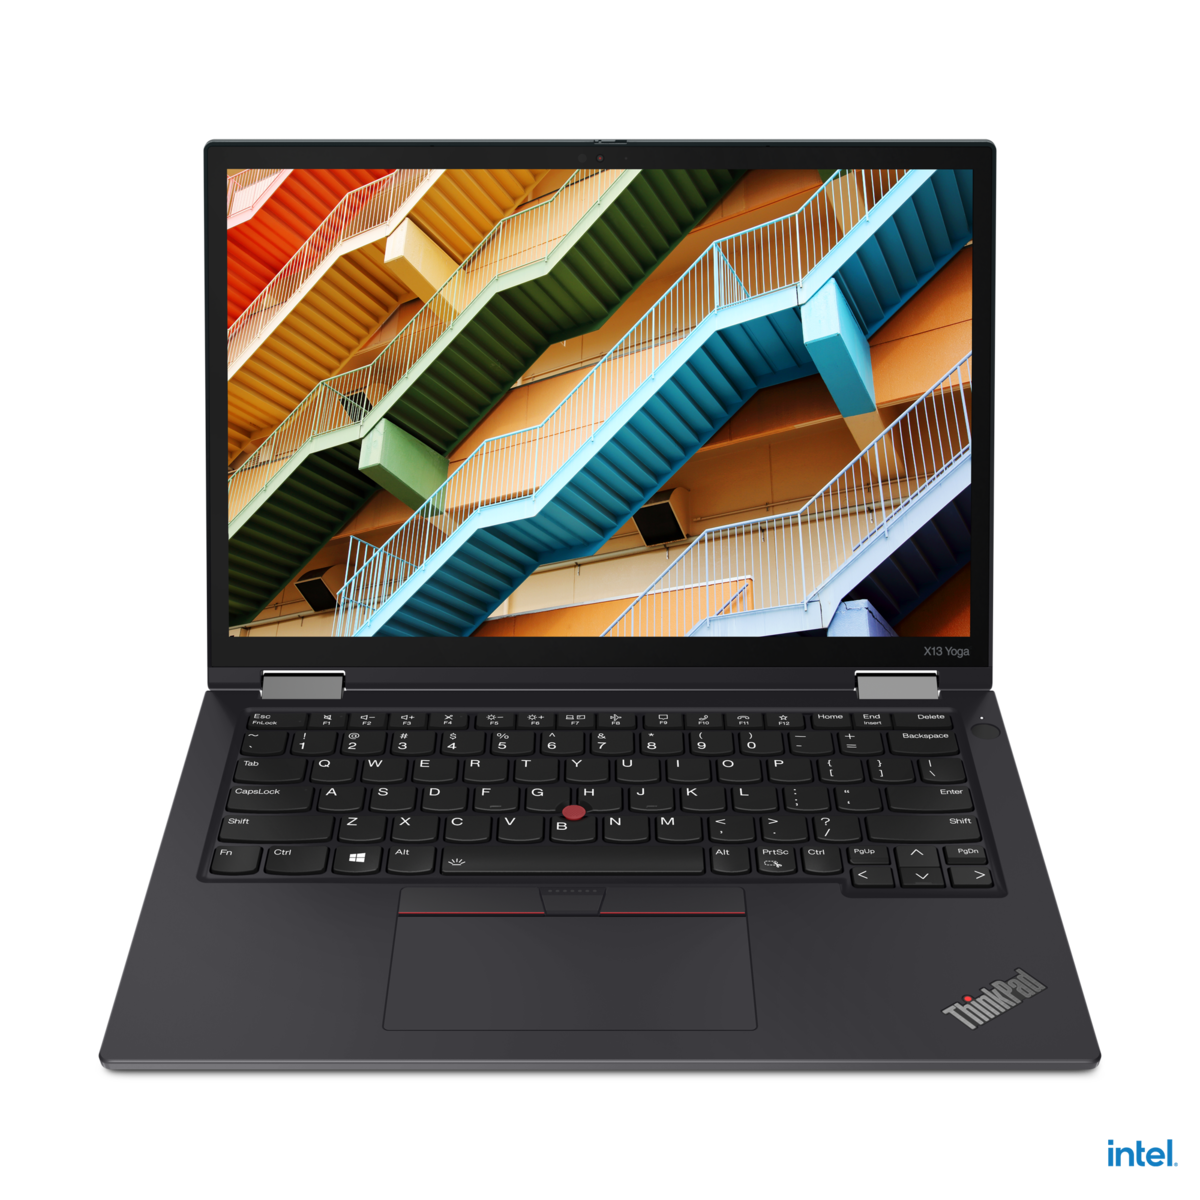 Lenovo launches the ThinkPad X13 Yoga Gen 2 with Tiger Lake vPro 